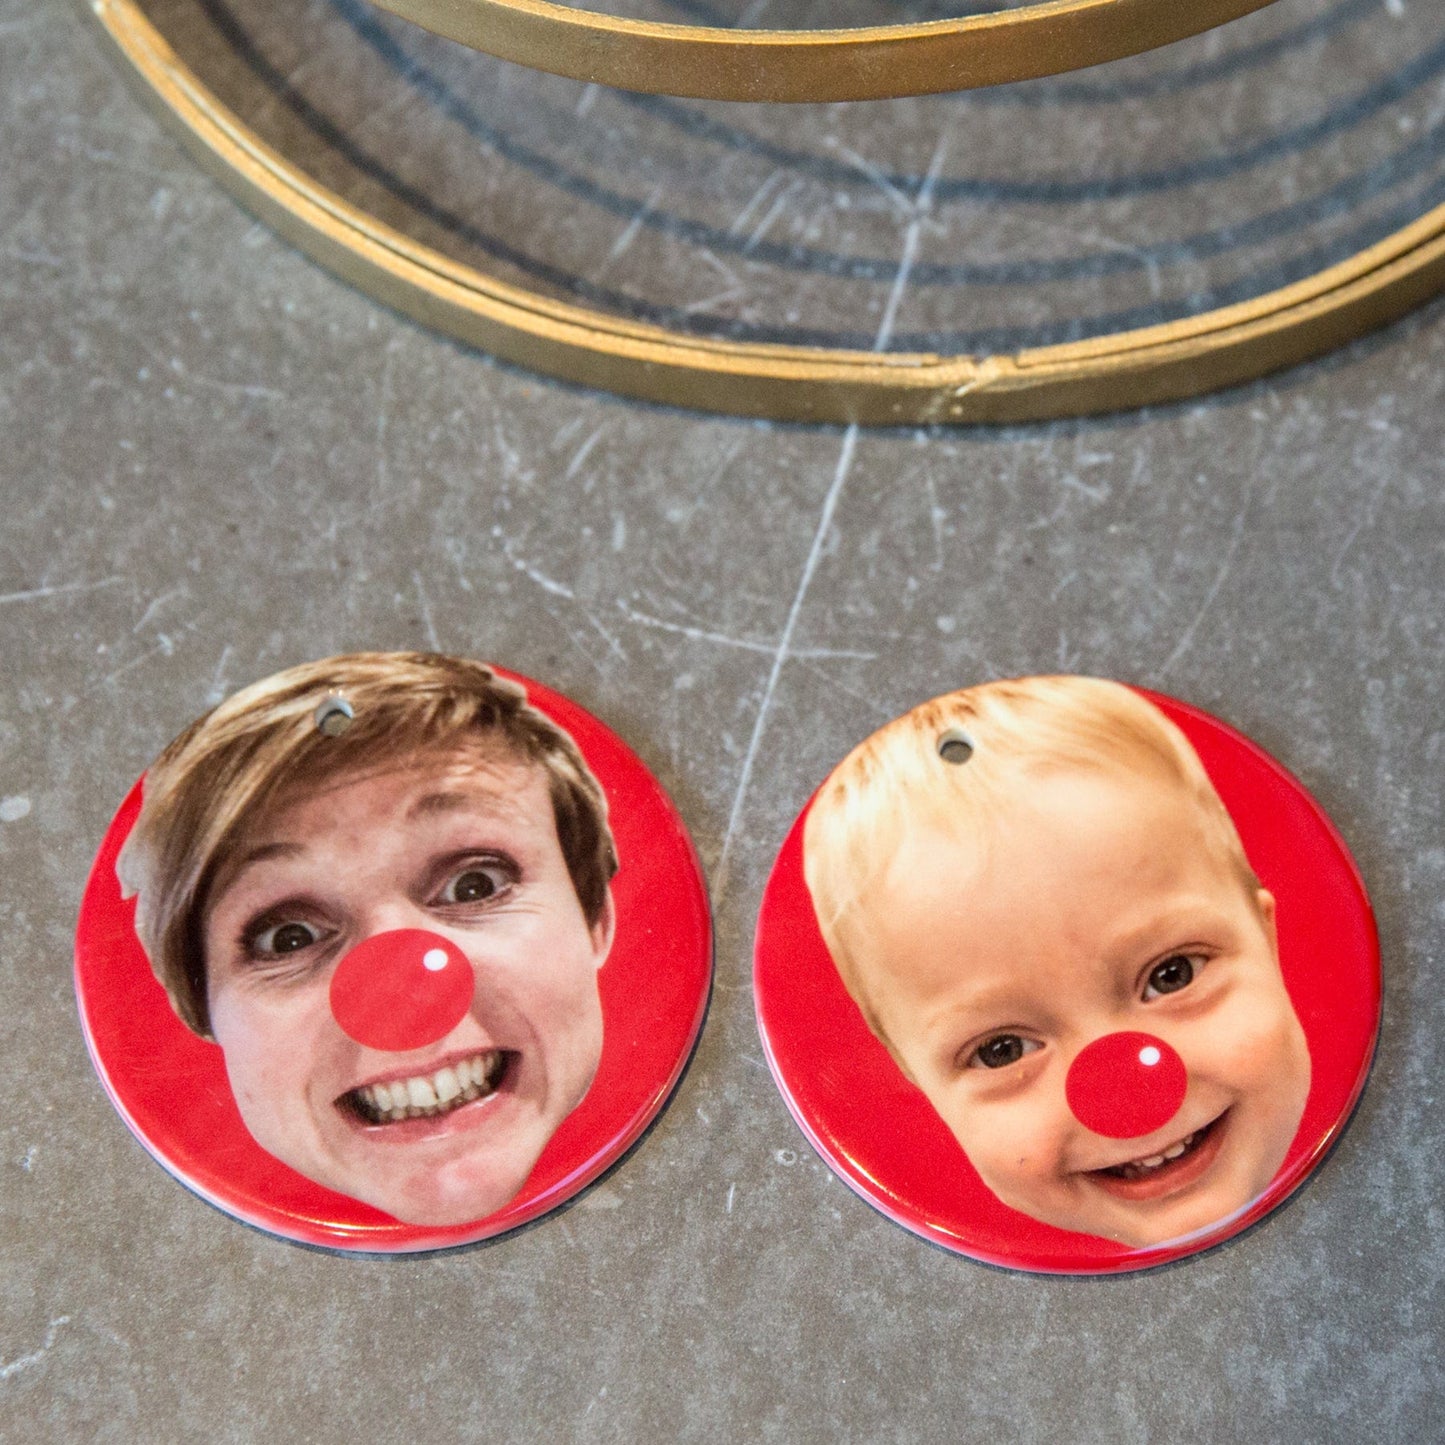 Unique Fun Christmas Decoration - Face Print From Your Photo - Ceramic Bauble Personalised With Your Head